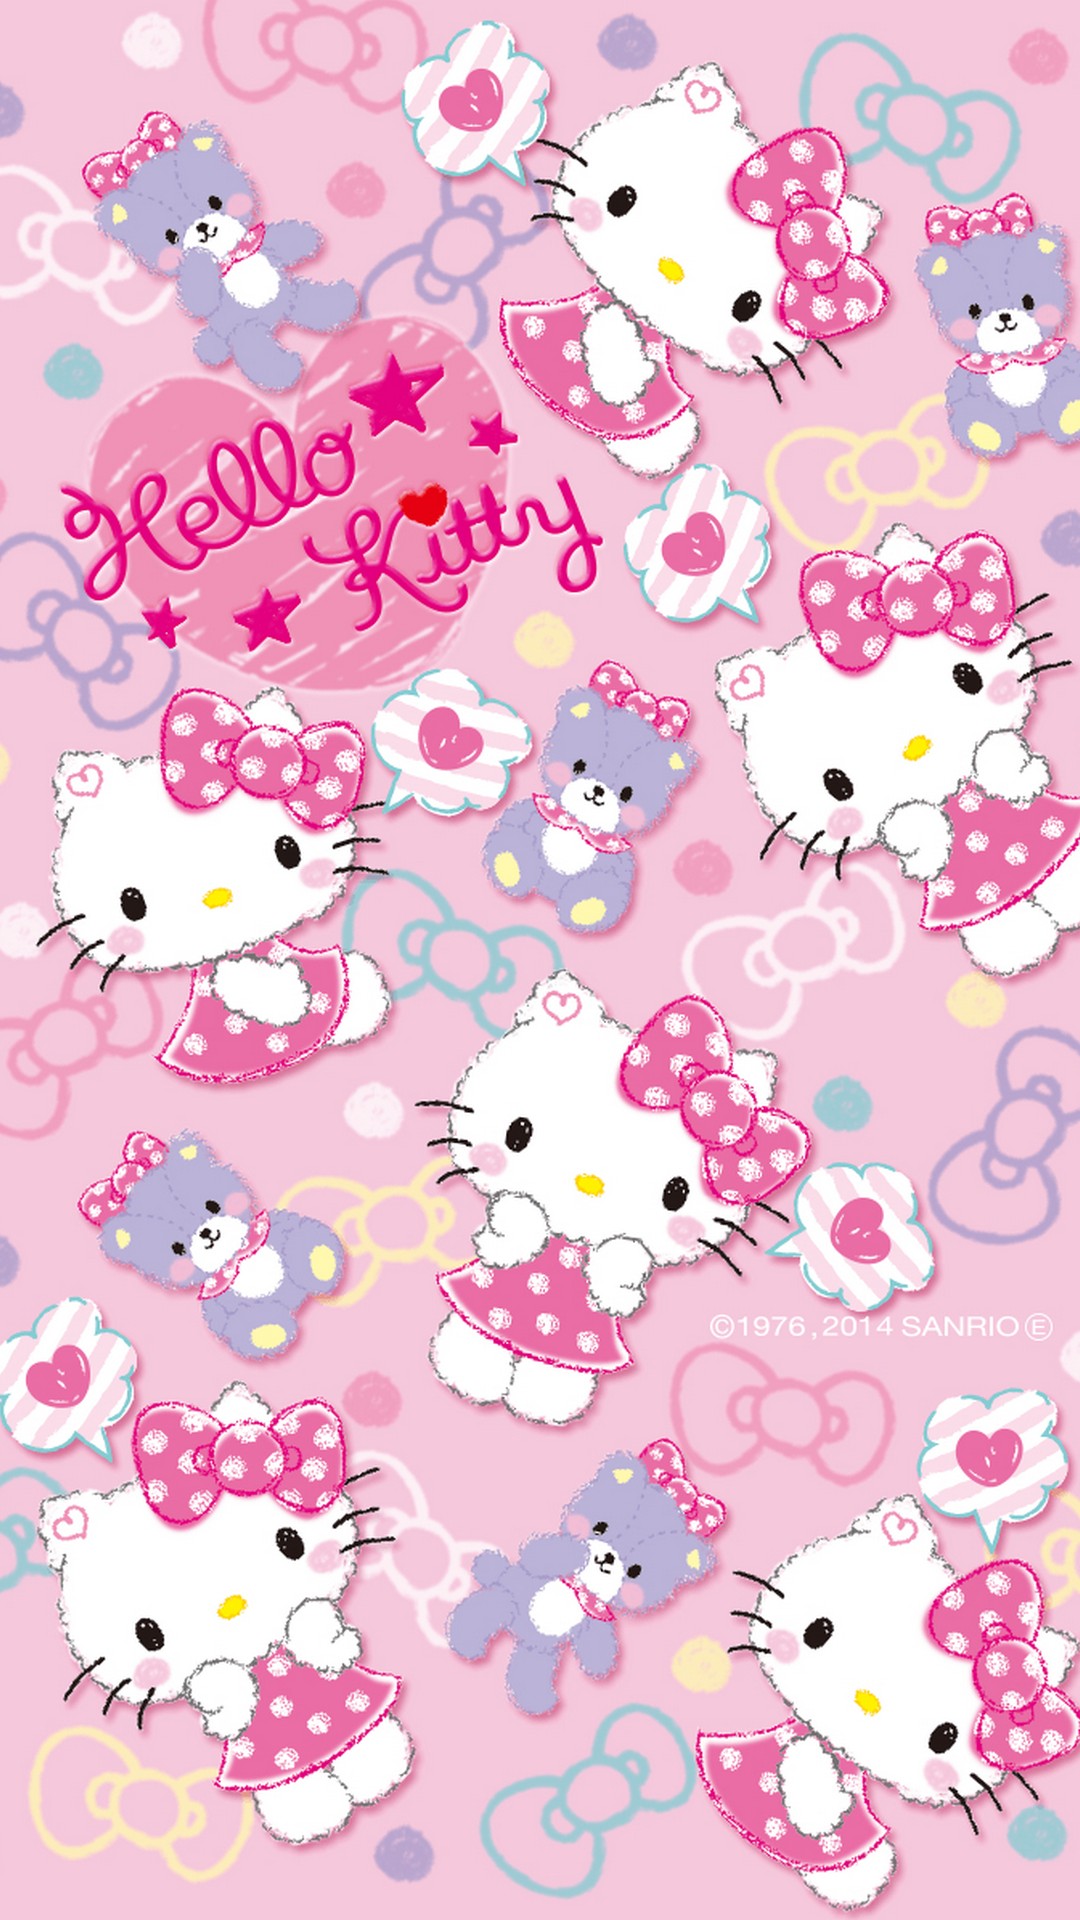  Wallpaper  Dinding  Hello  Kitty  WALLPAPERS 